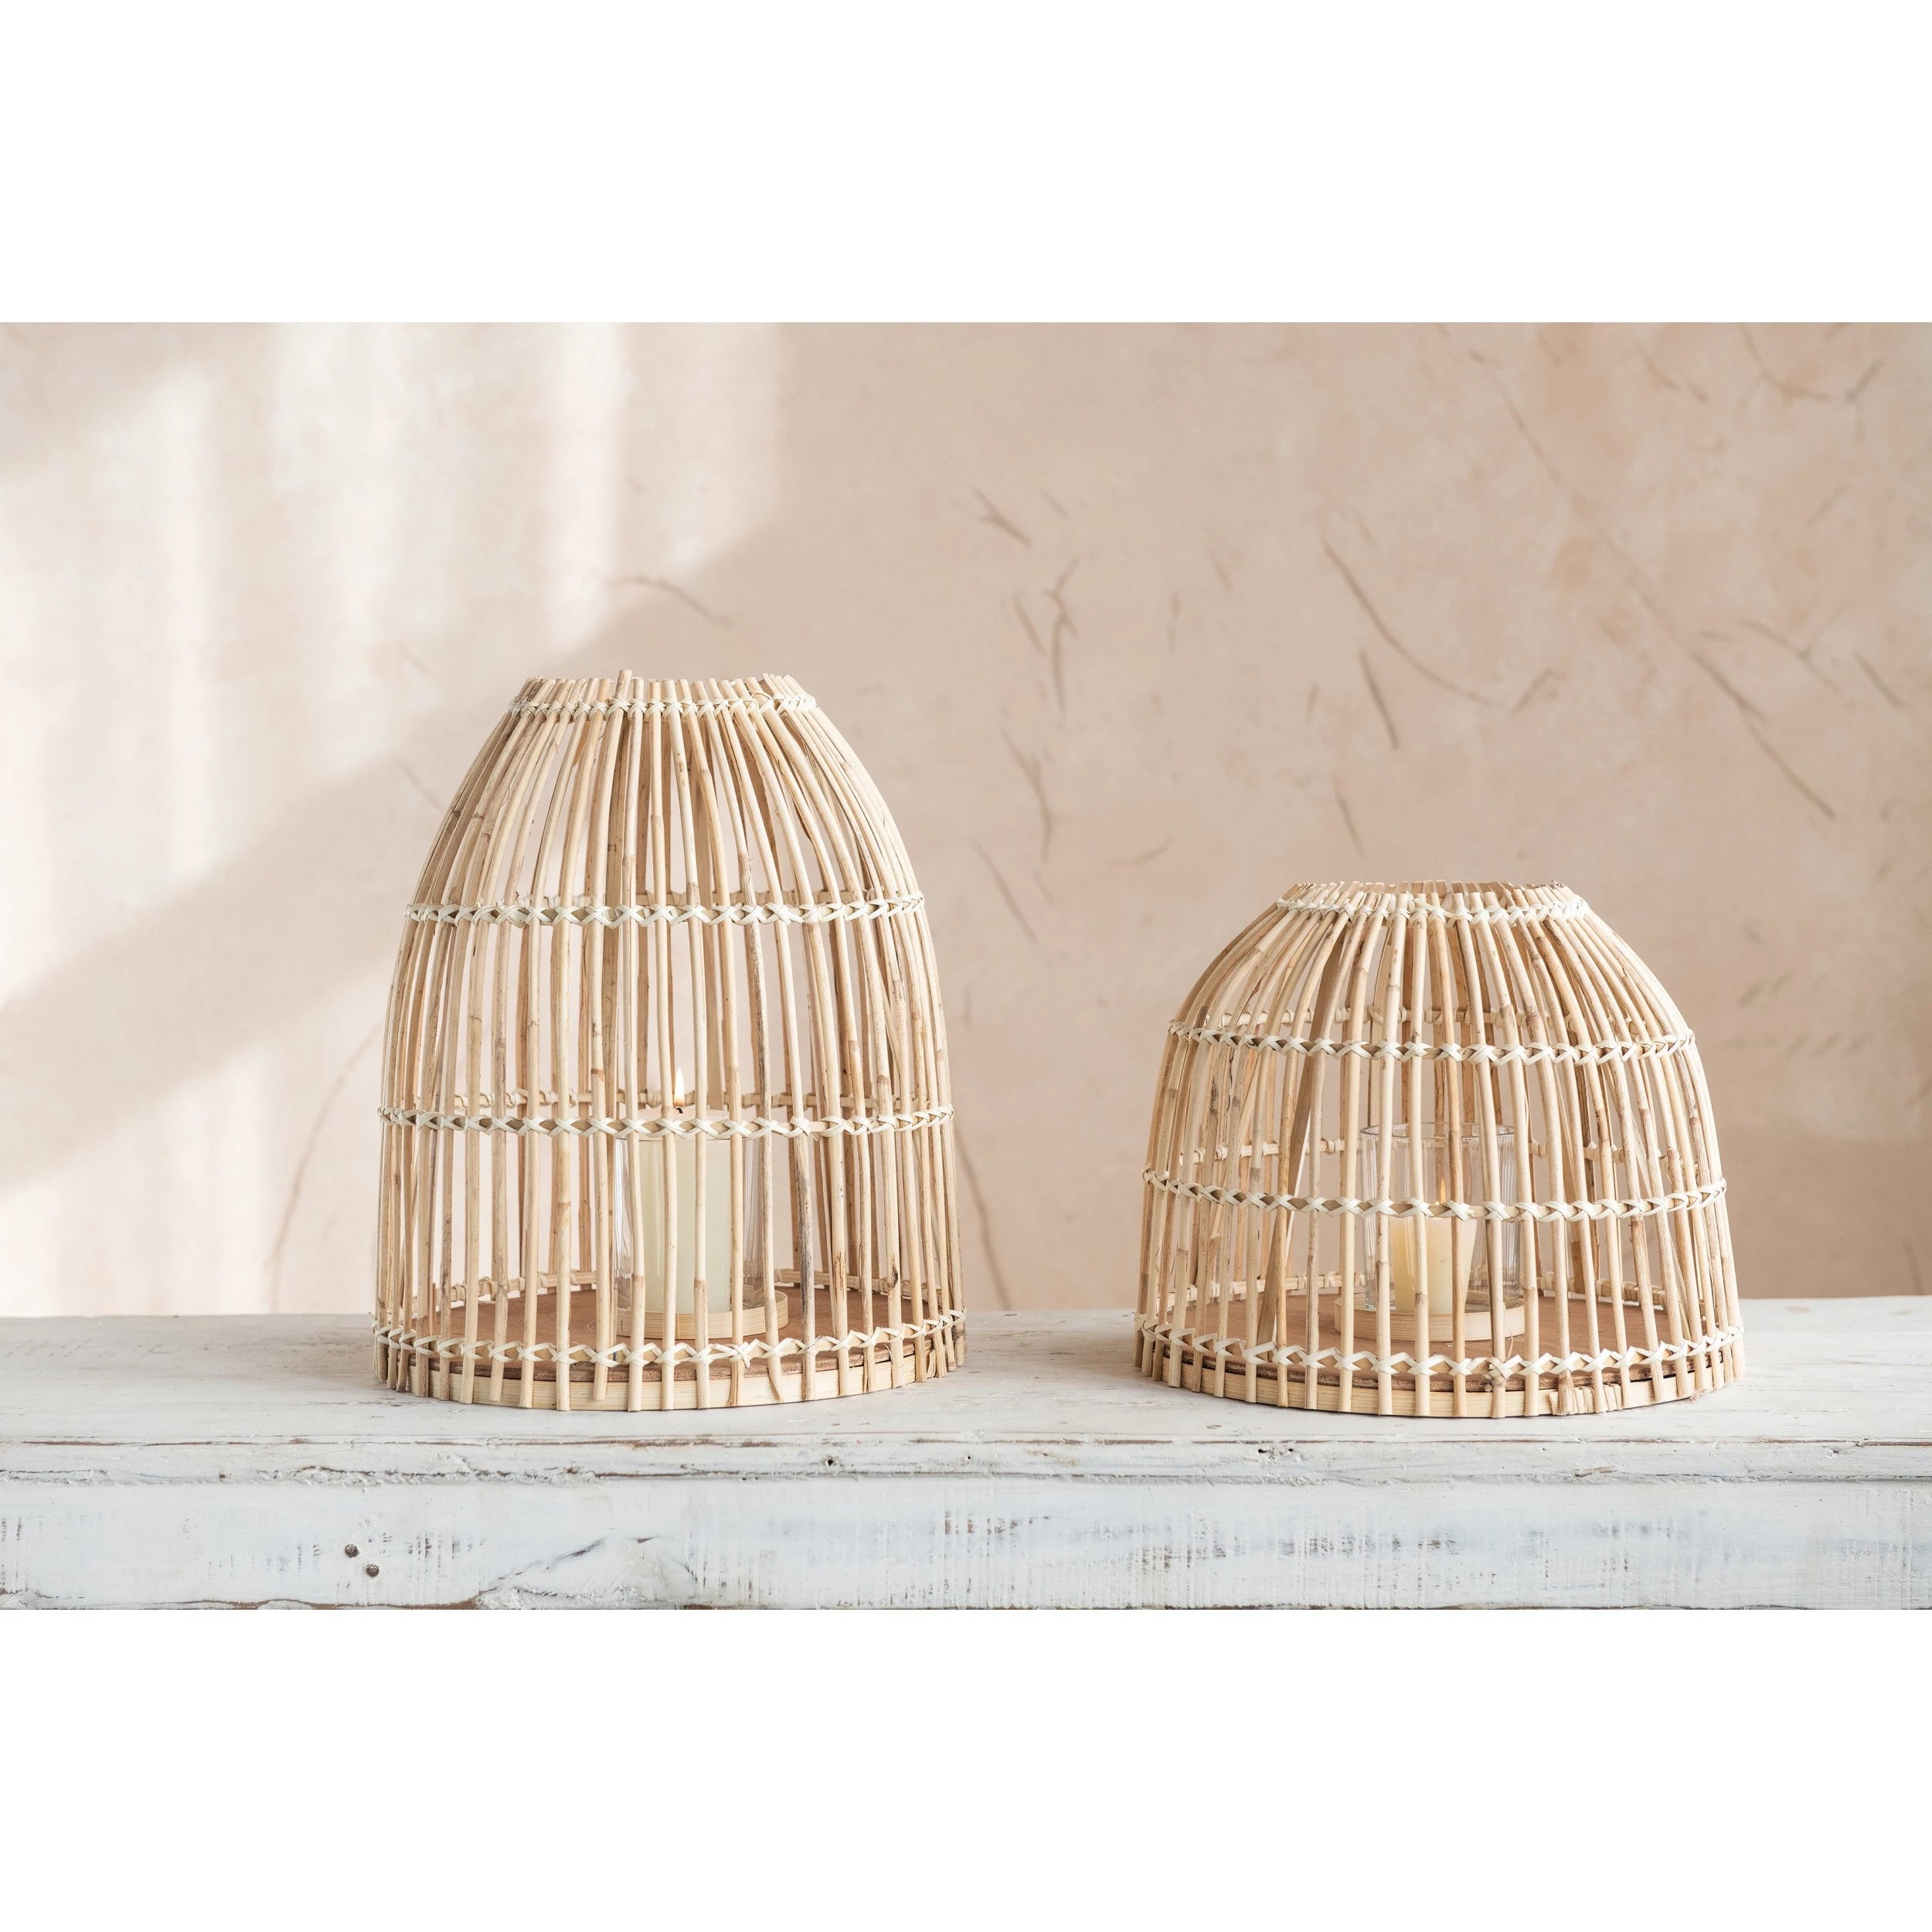 Bamboo Lanterns with Glass Inserts, Set of 2 - Image 3